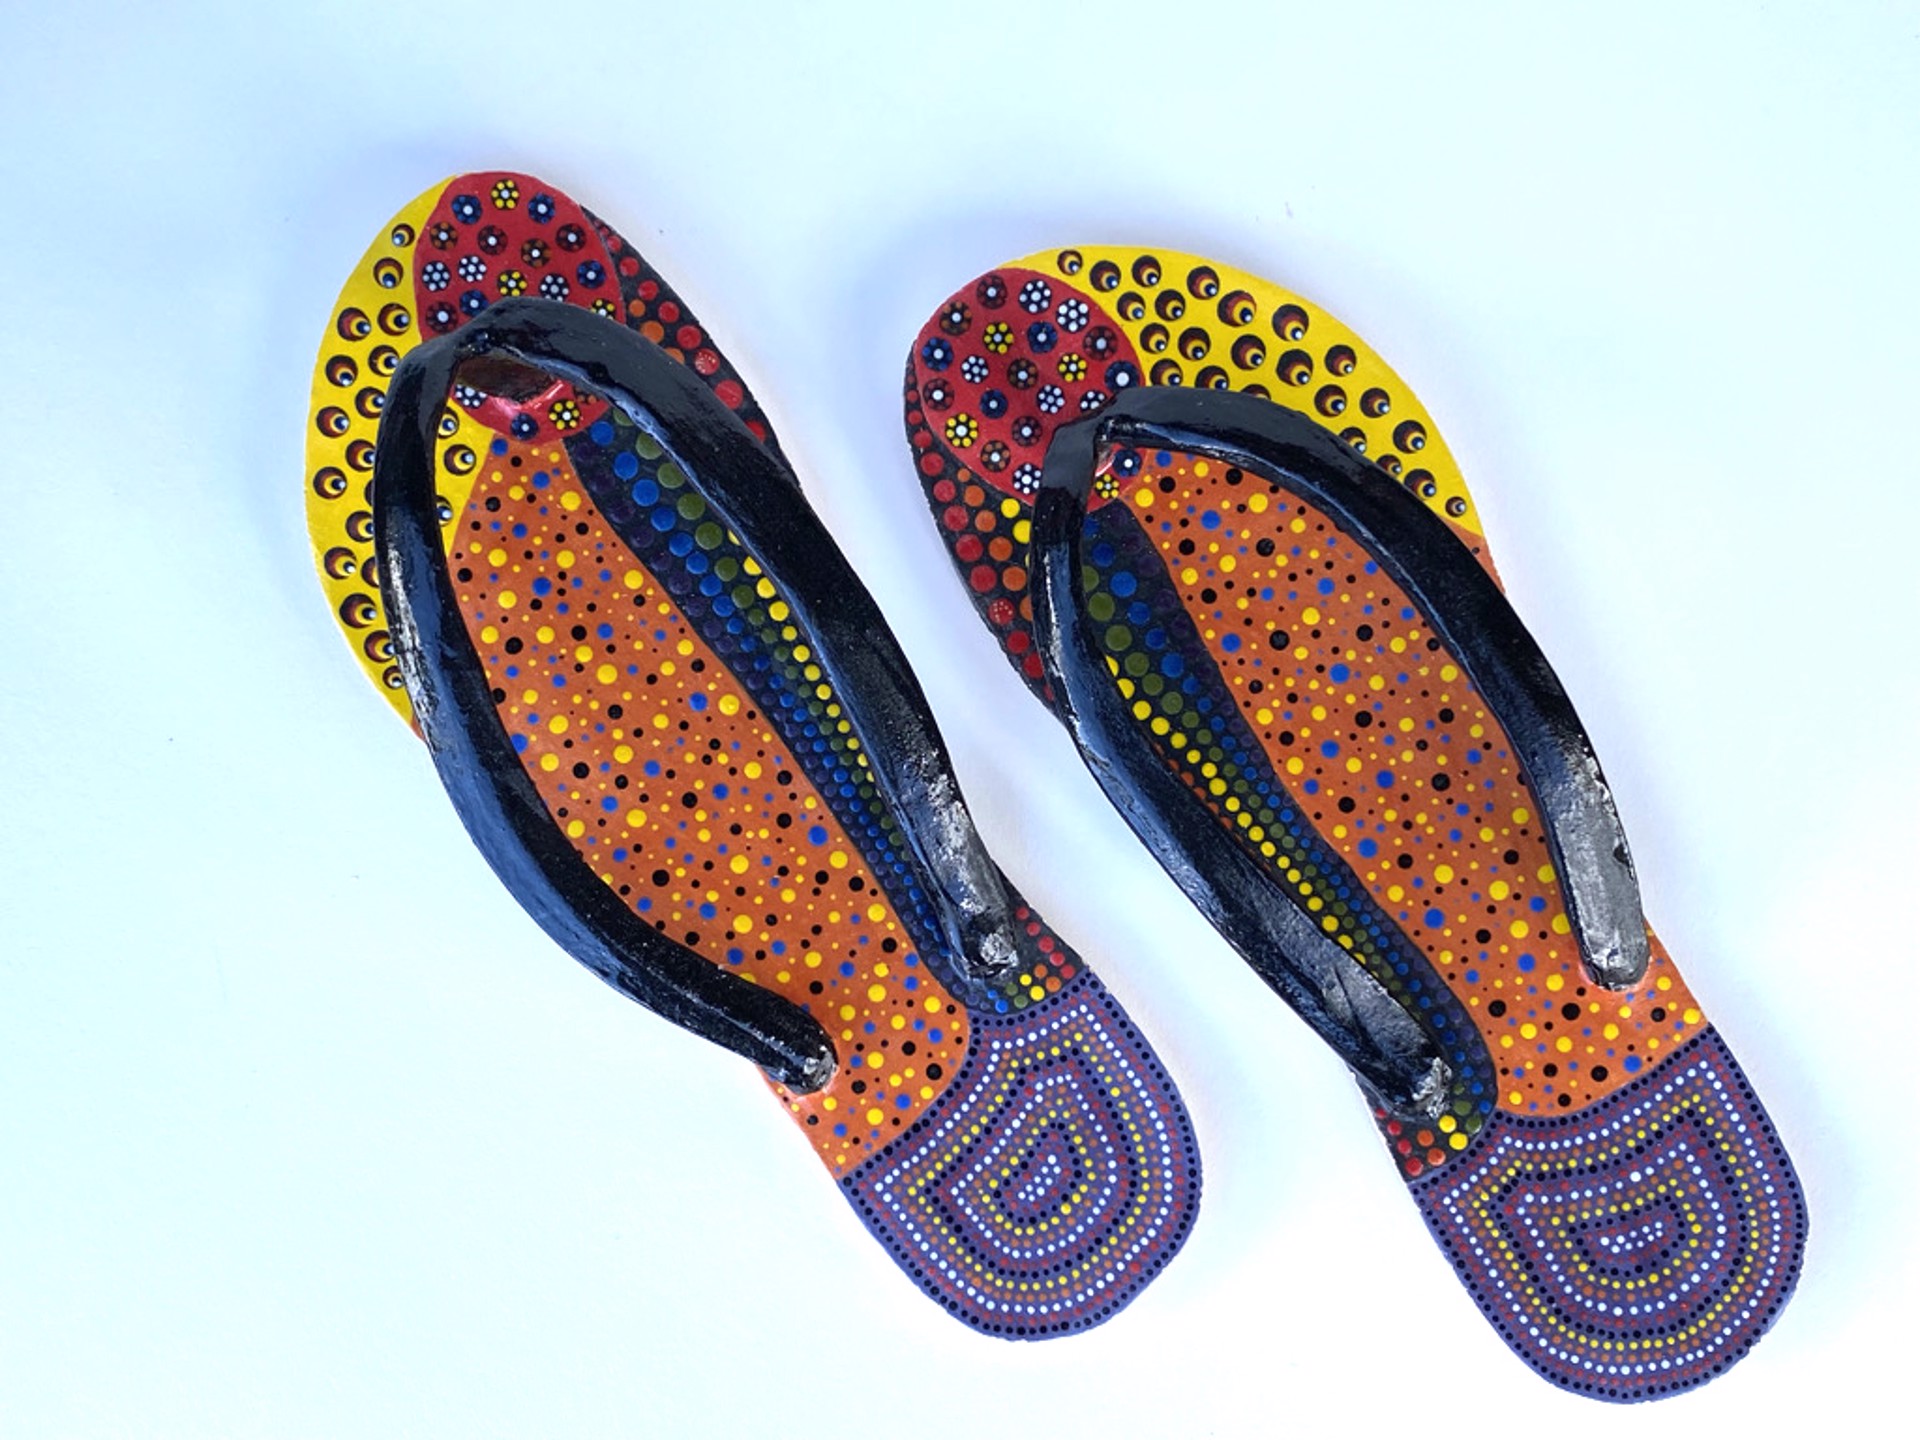 Slippers 1 by Minette Hawaiʻi